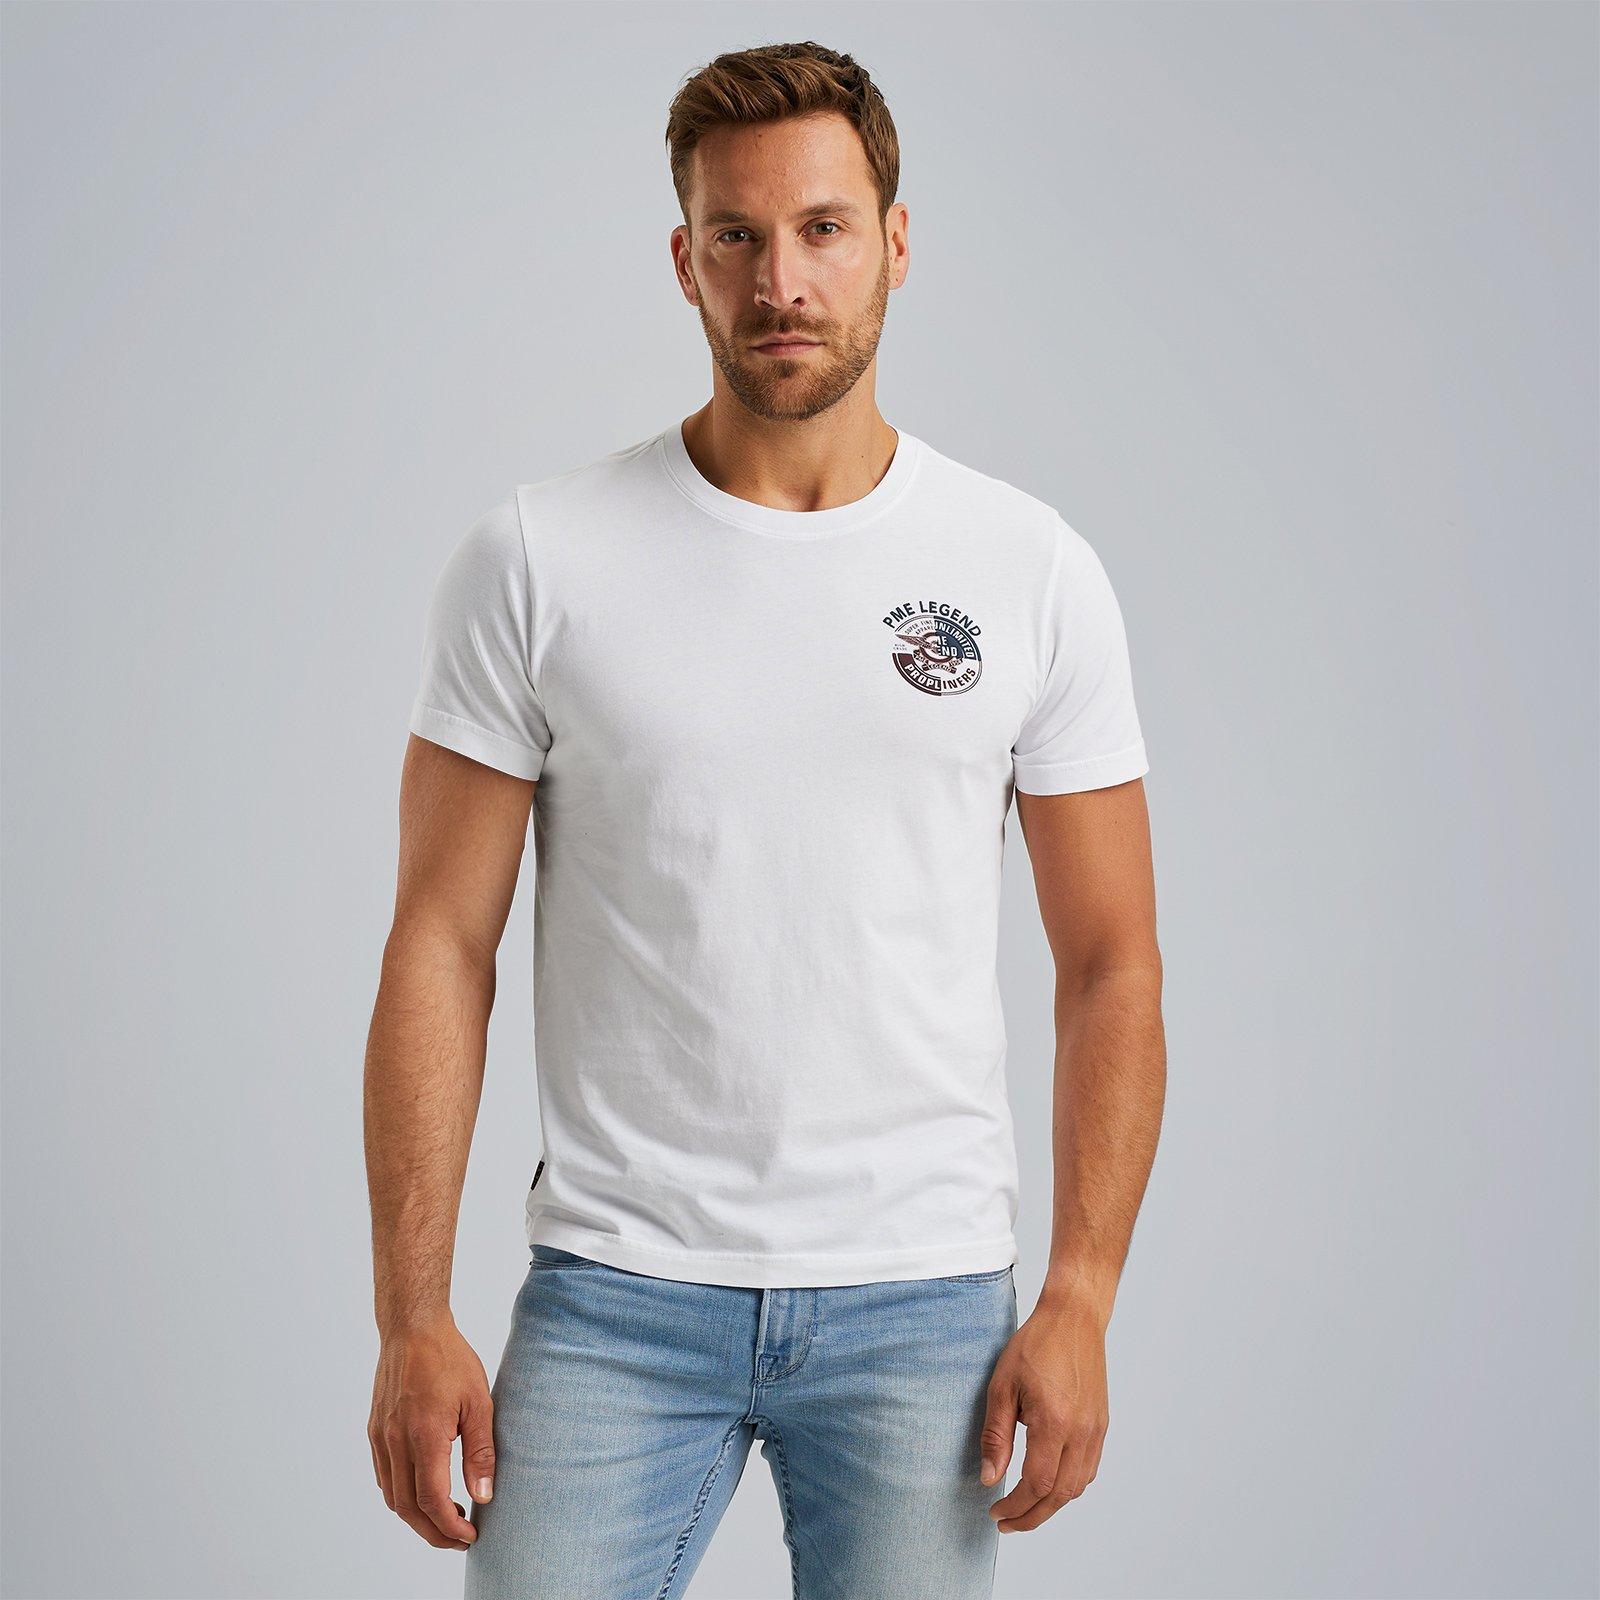 PME Legend Casual R-Neck Jersey T-shirt White Heren